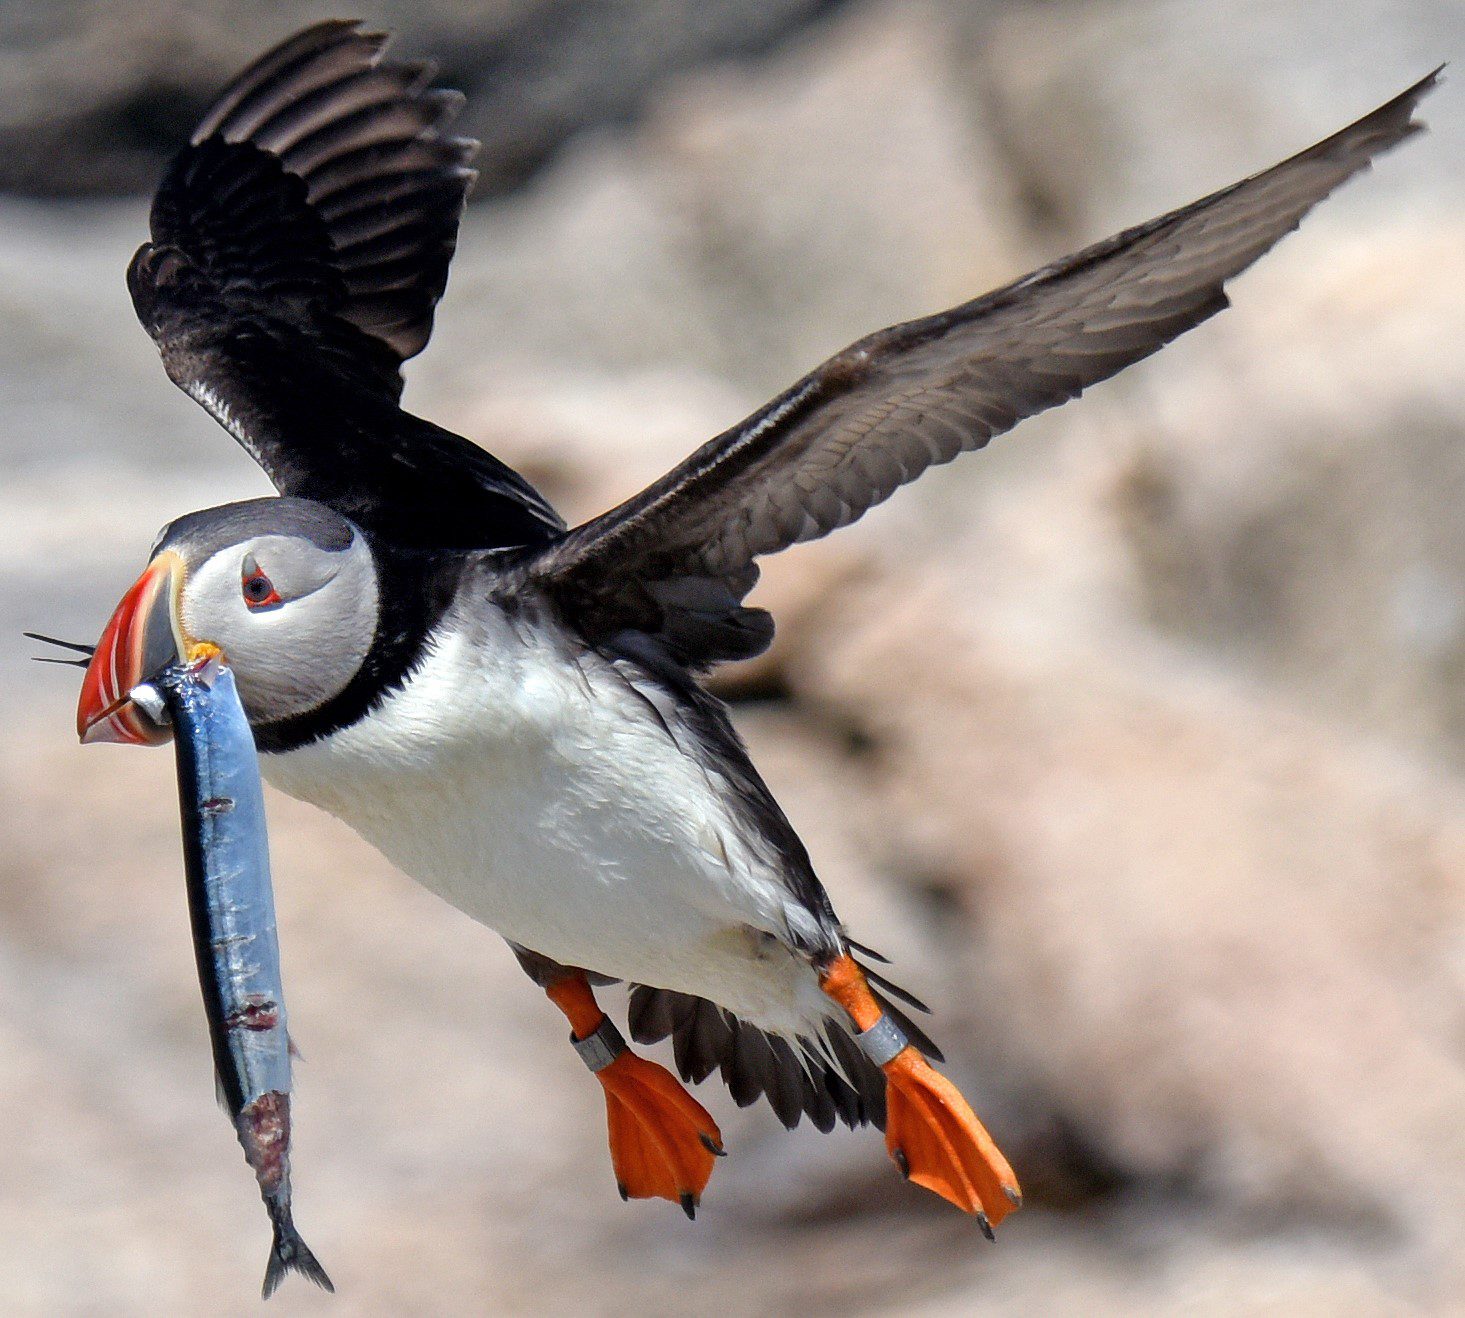 A puffin flies through the air with a fish in its beak